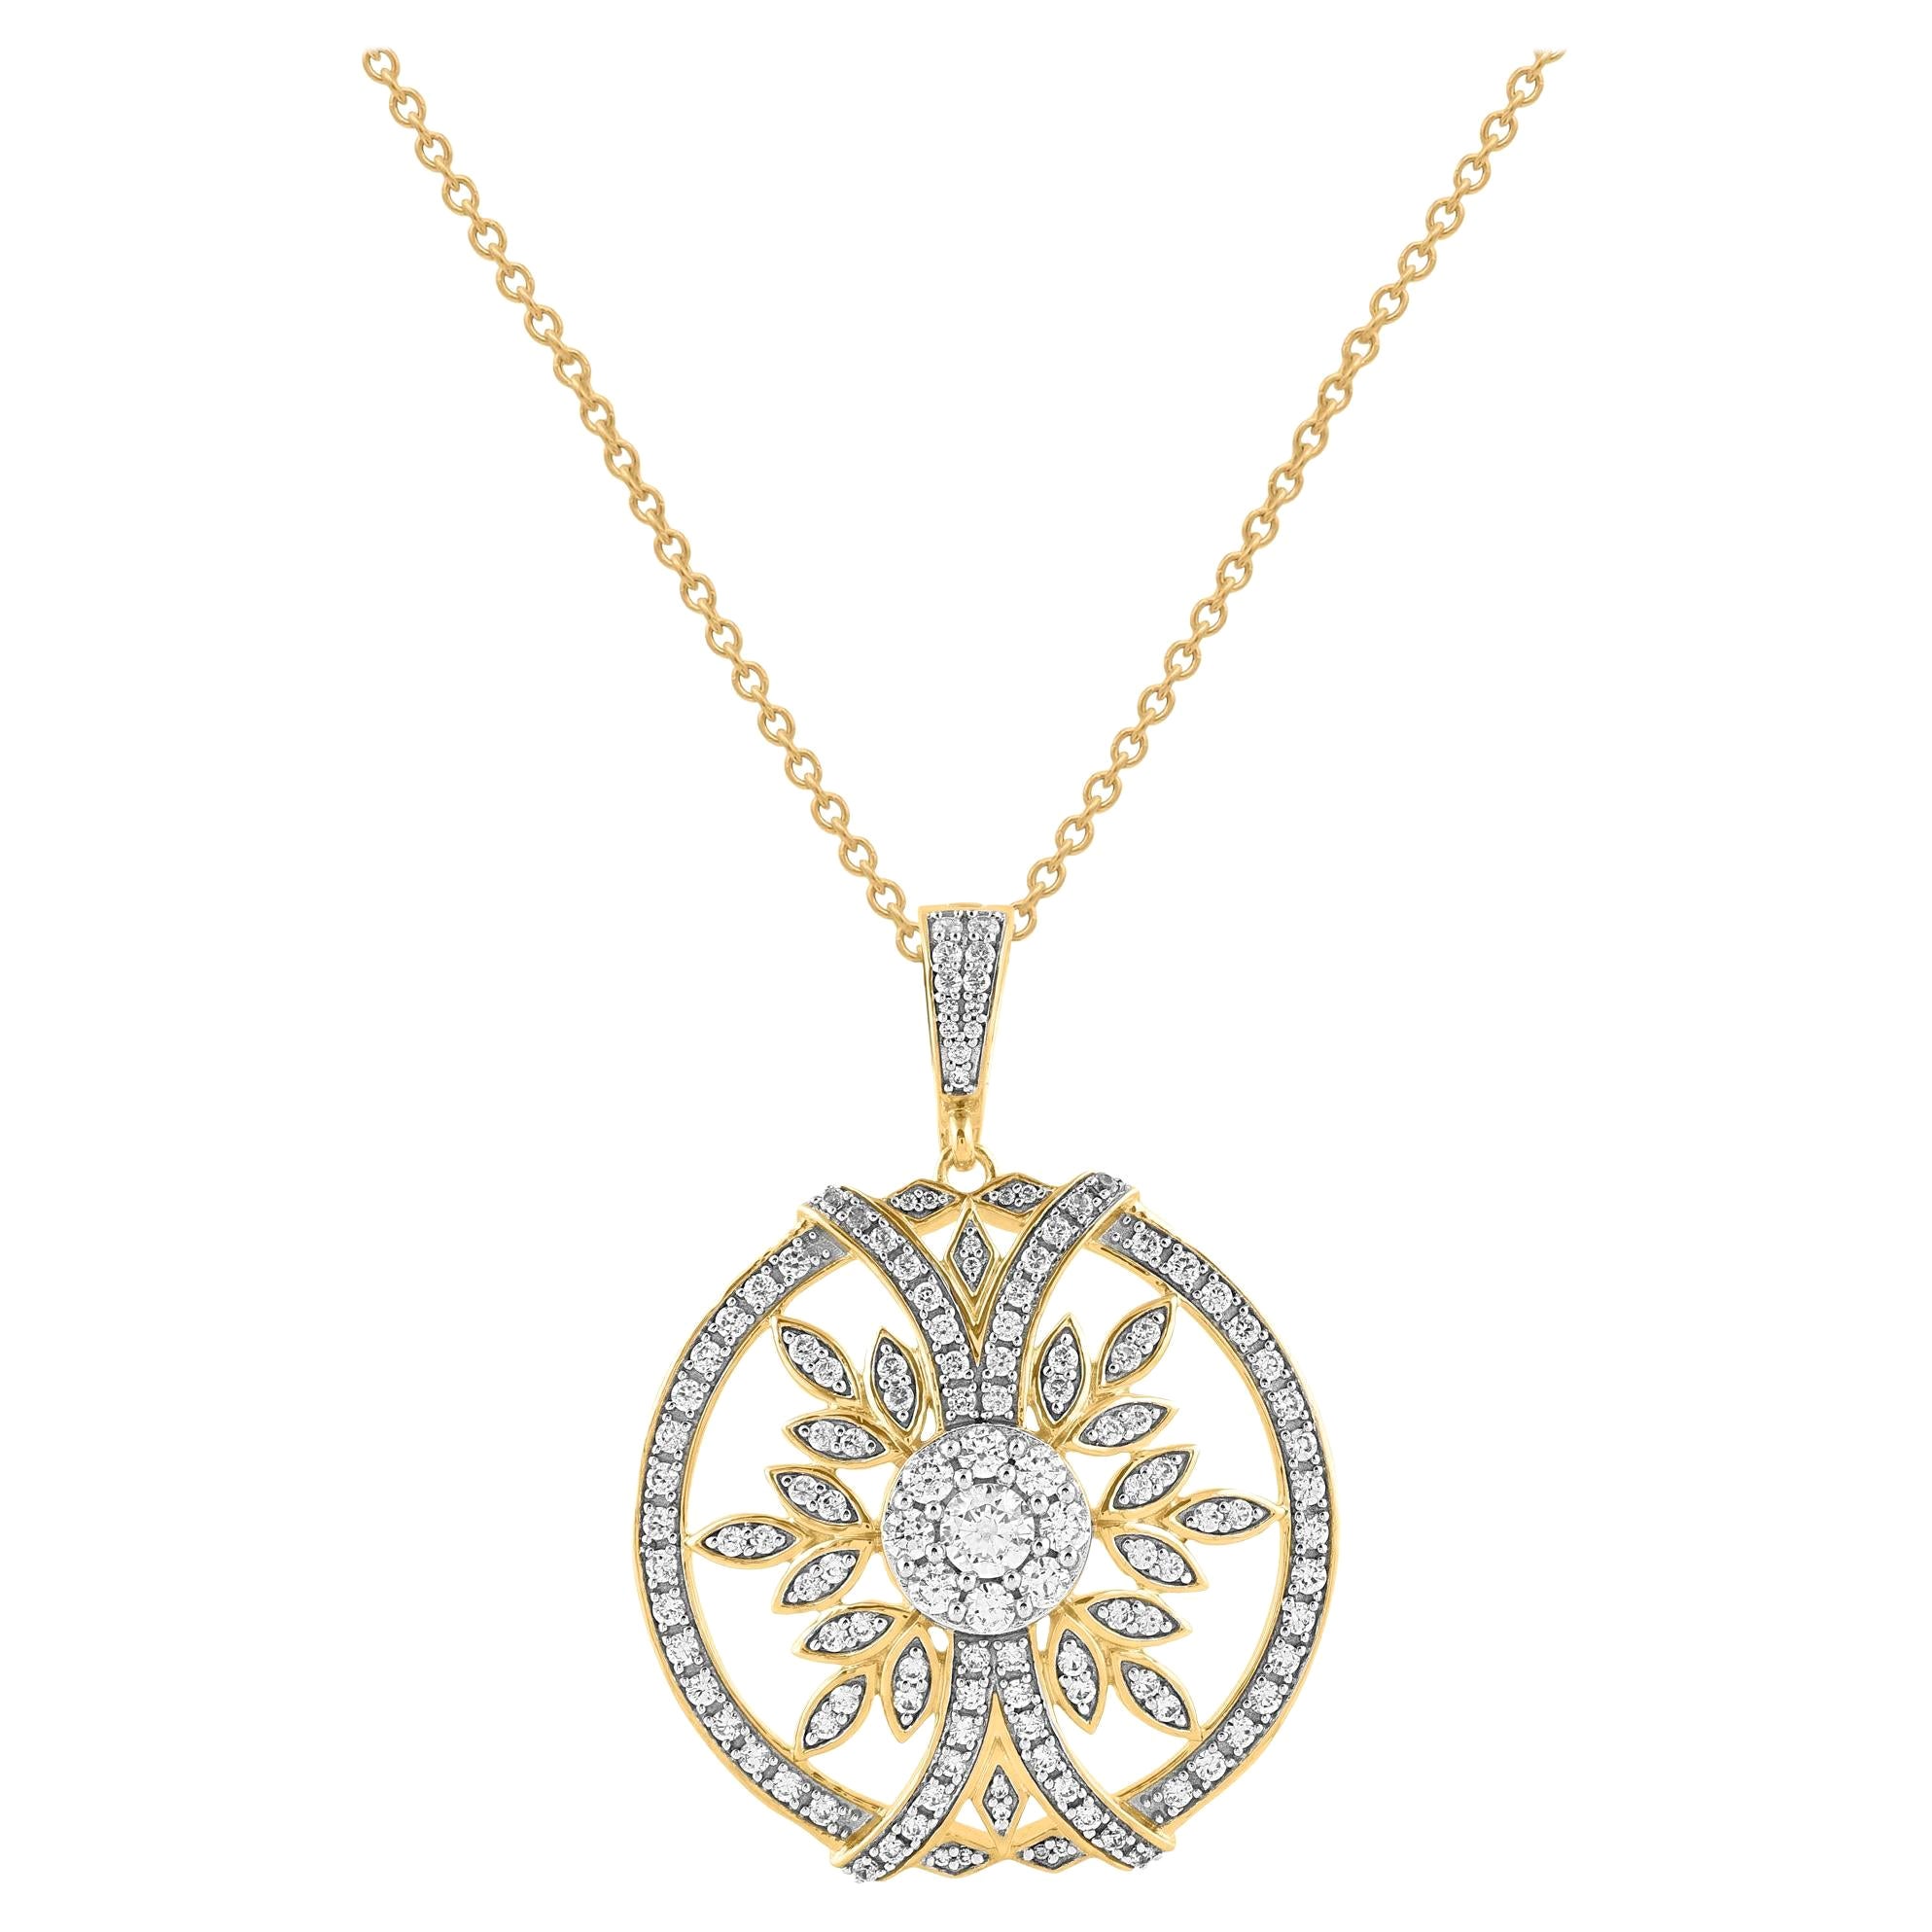 TJD 1.0 Carat Natural Round Diamond 14KT Yellow Gold Circle Cluster Necklace For Sale